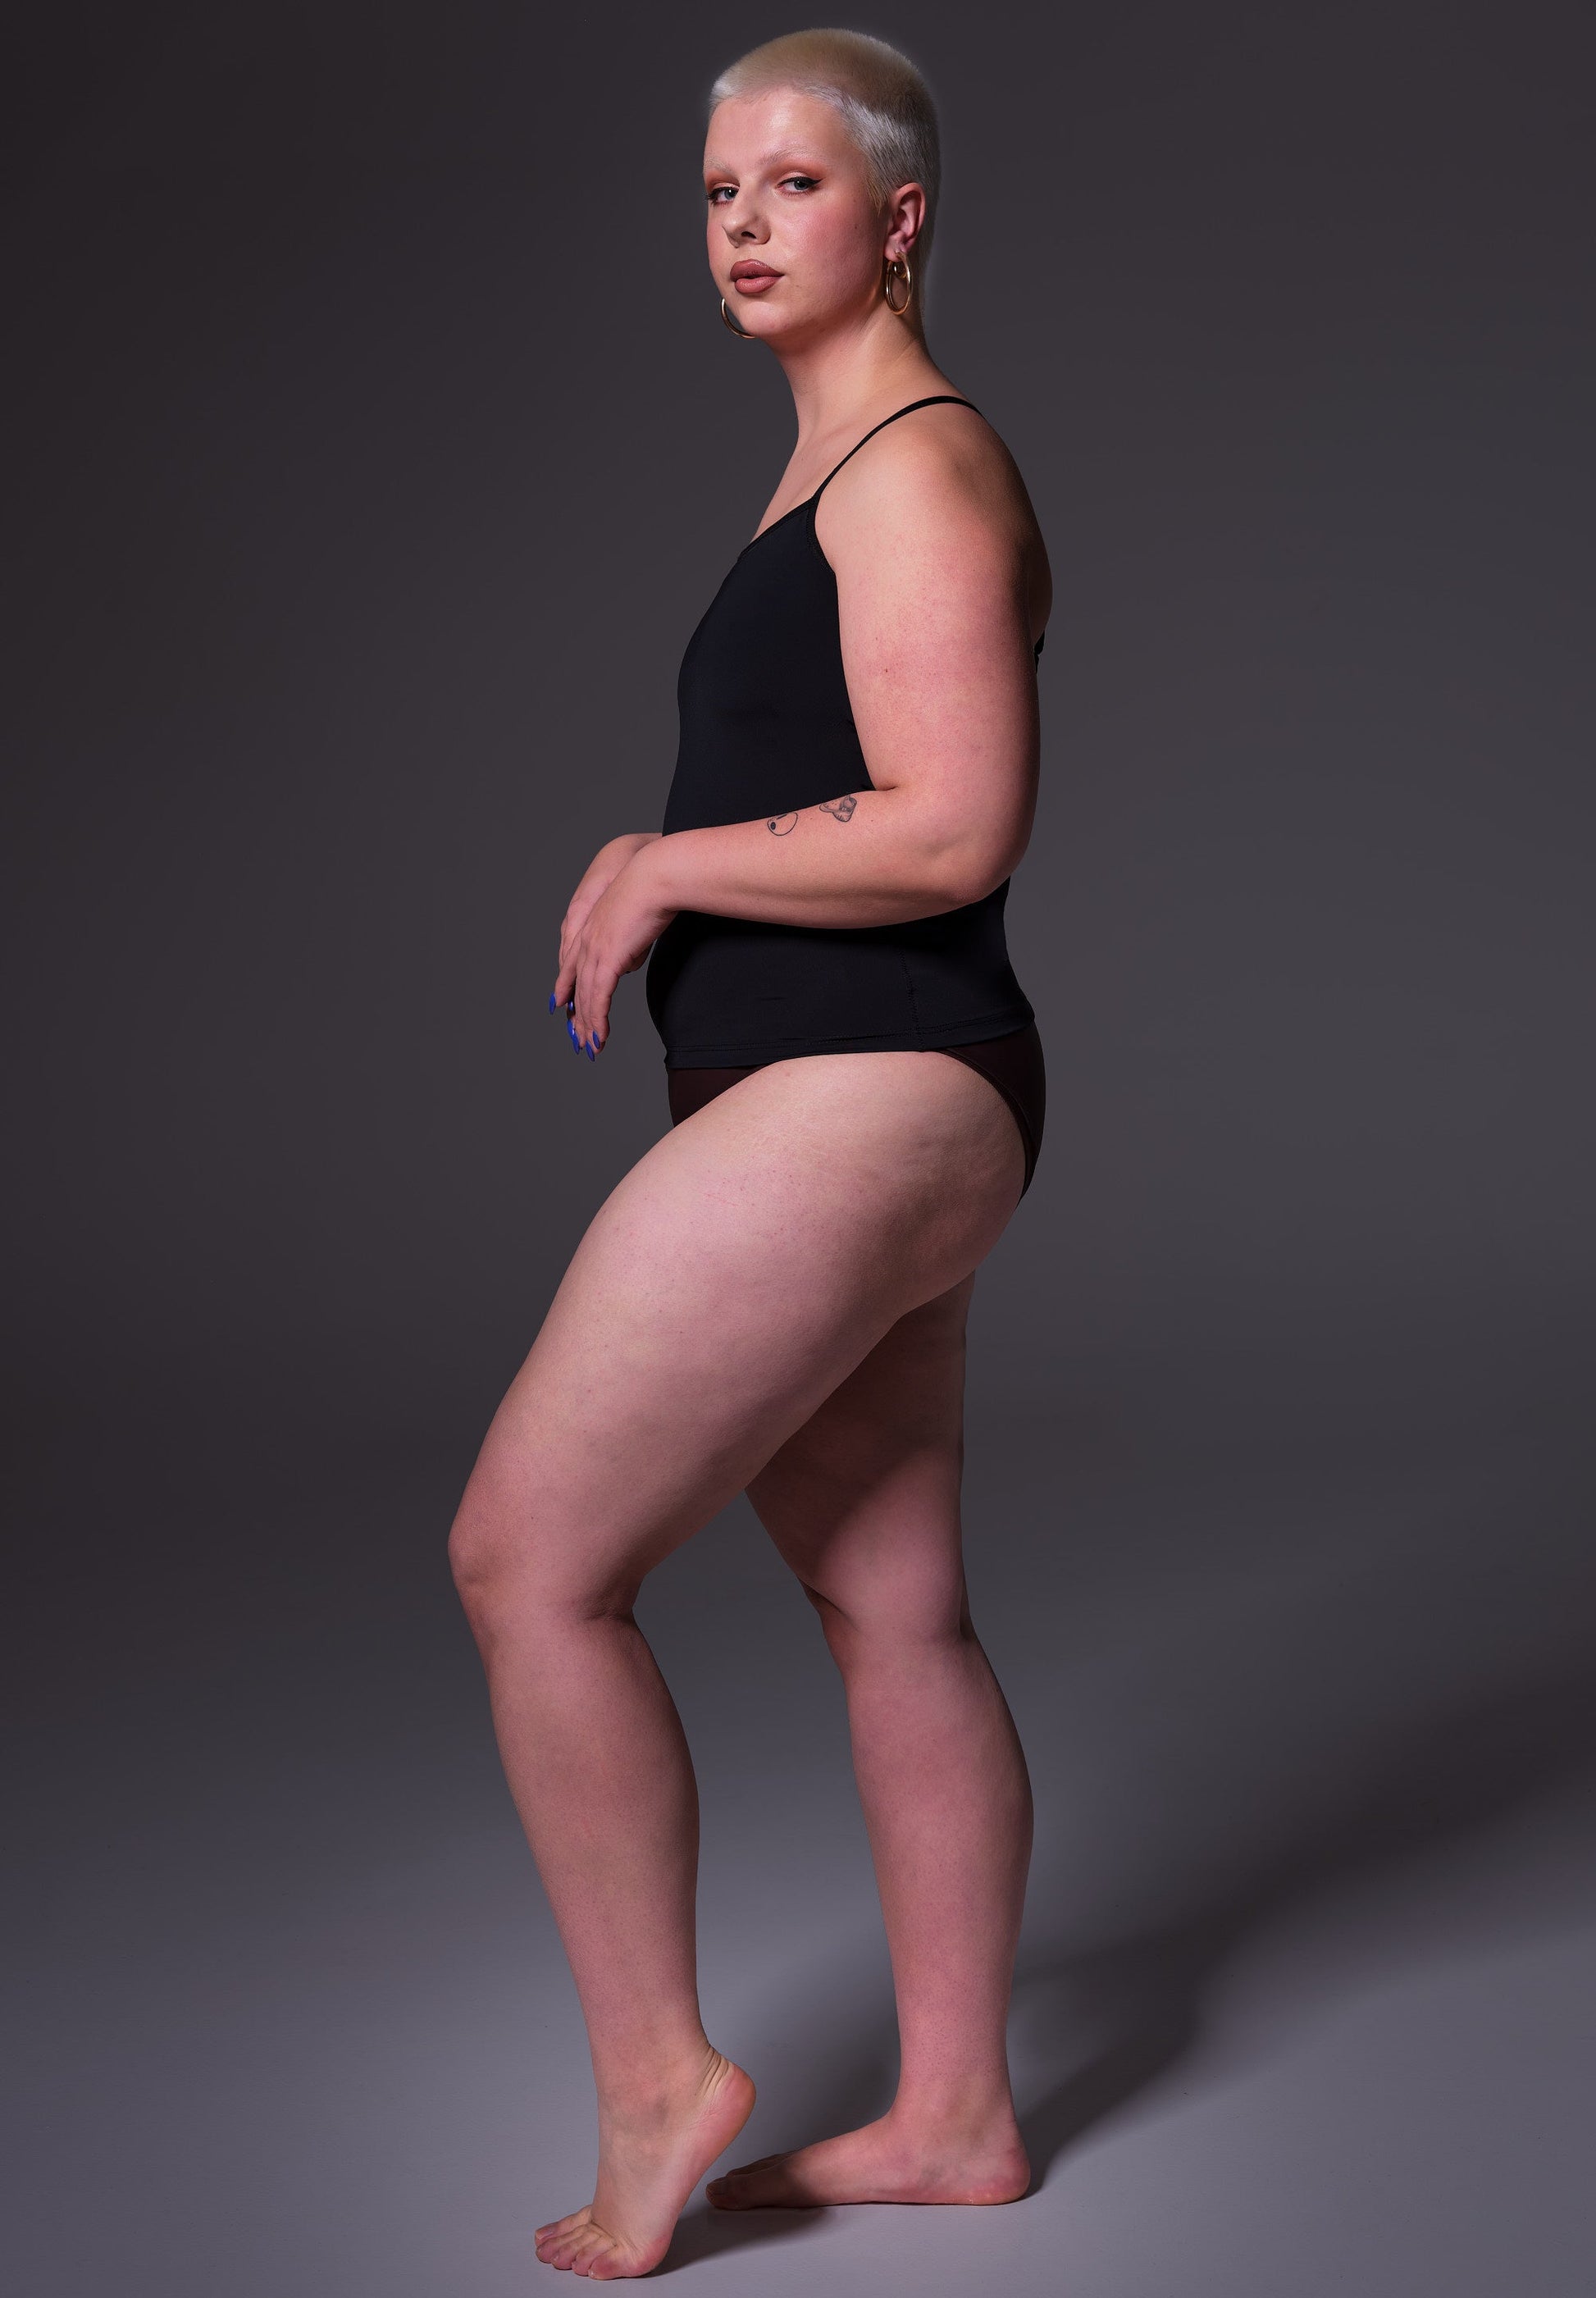 Sasha seen from the side wearing the Singlet Advanced black